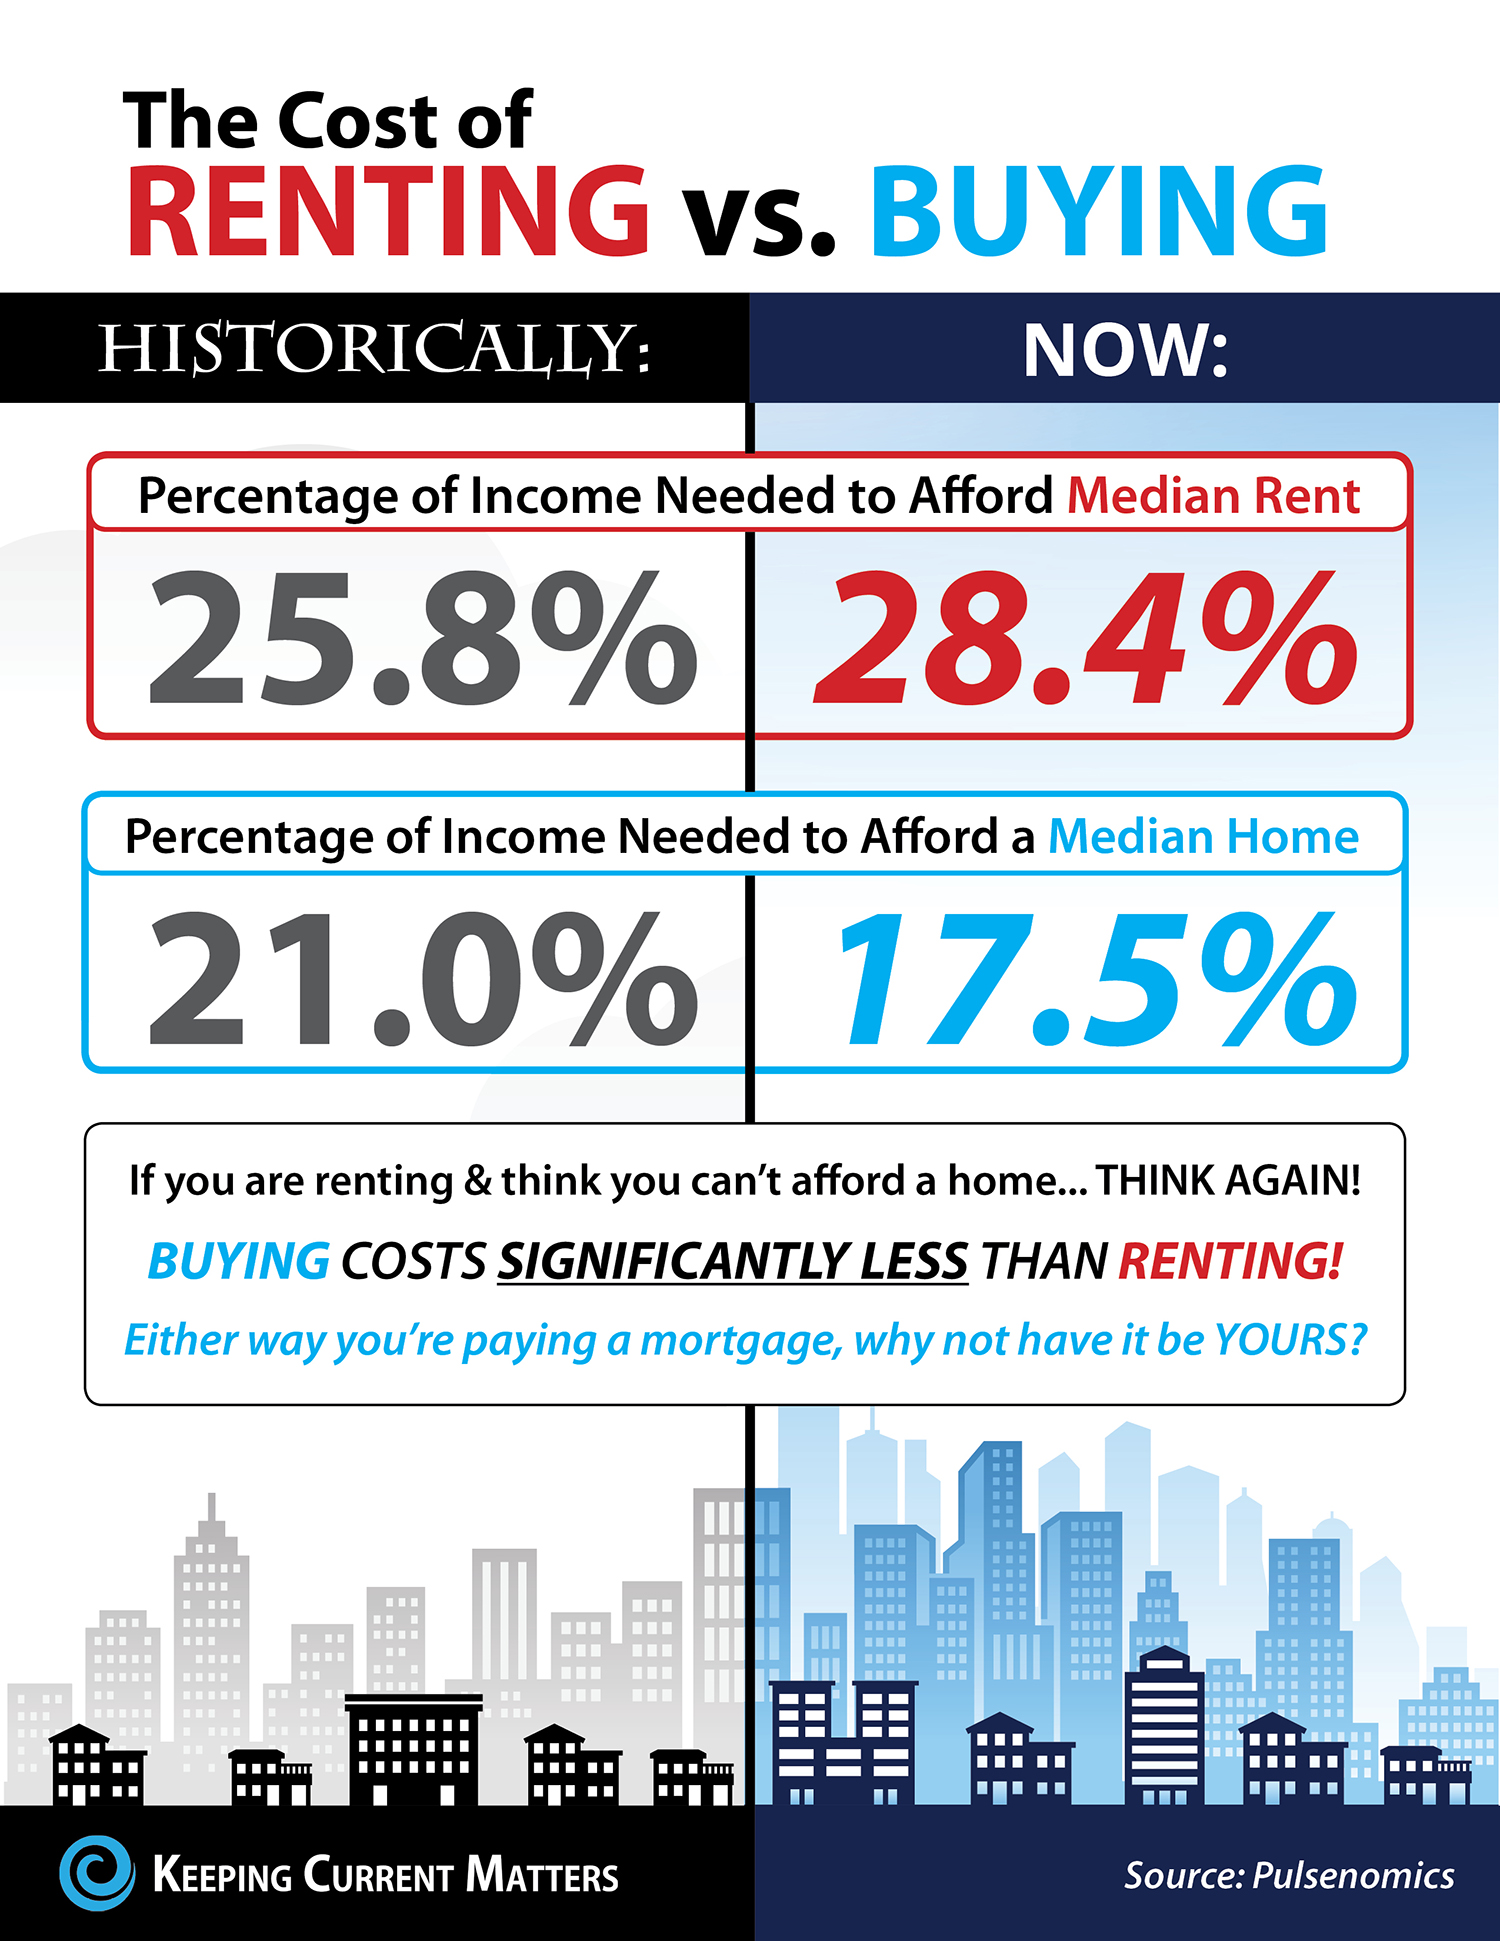 The Cost of Renting v. Buying